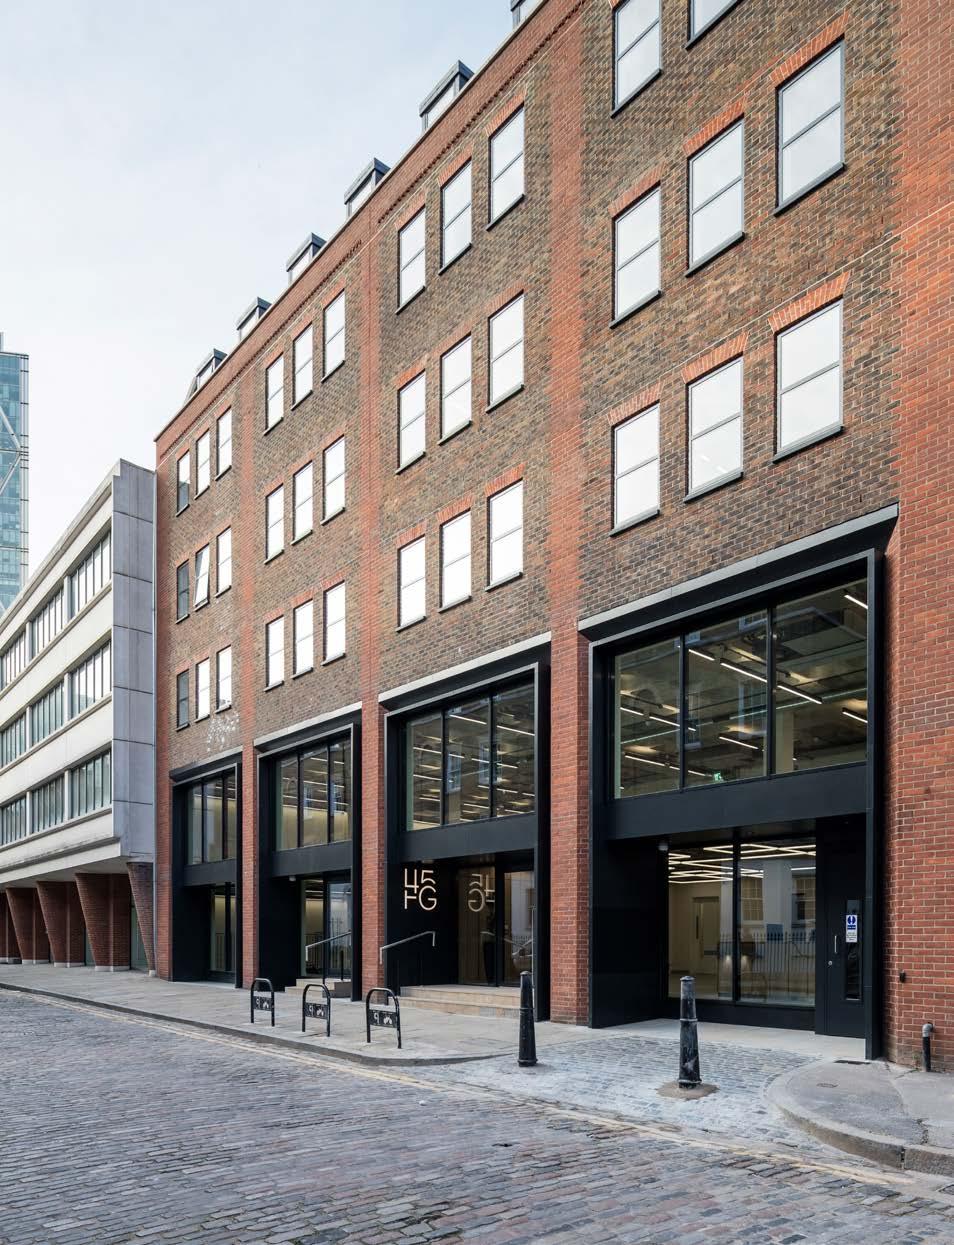 45 Folgate Introduction Under the direction of Tate Hindle Architects, Colliers International have worked in collaboration to reimagine this unmistakable 1980 s architecture into a one-of-a-kind